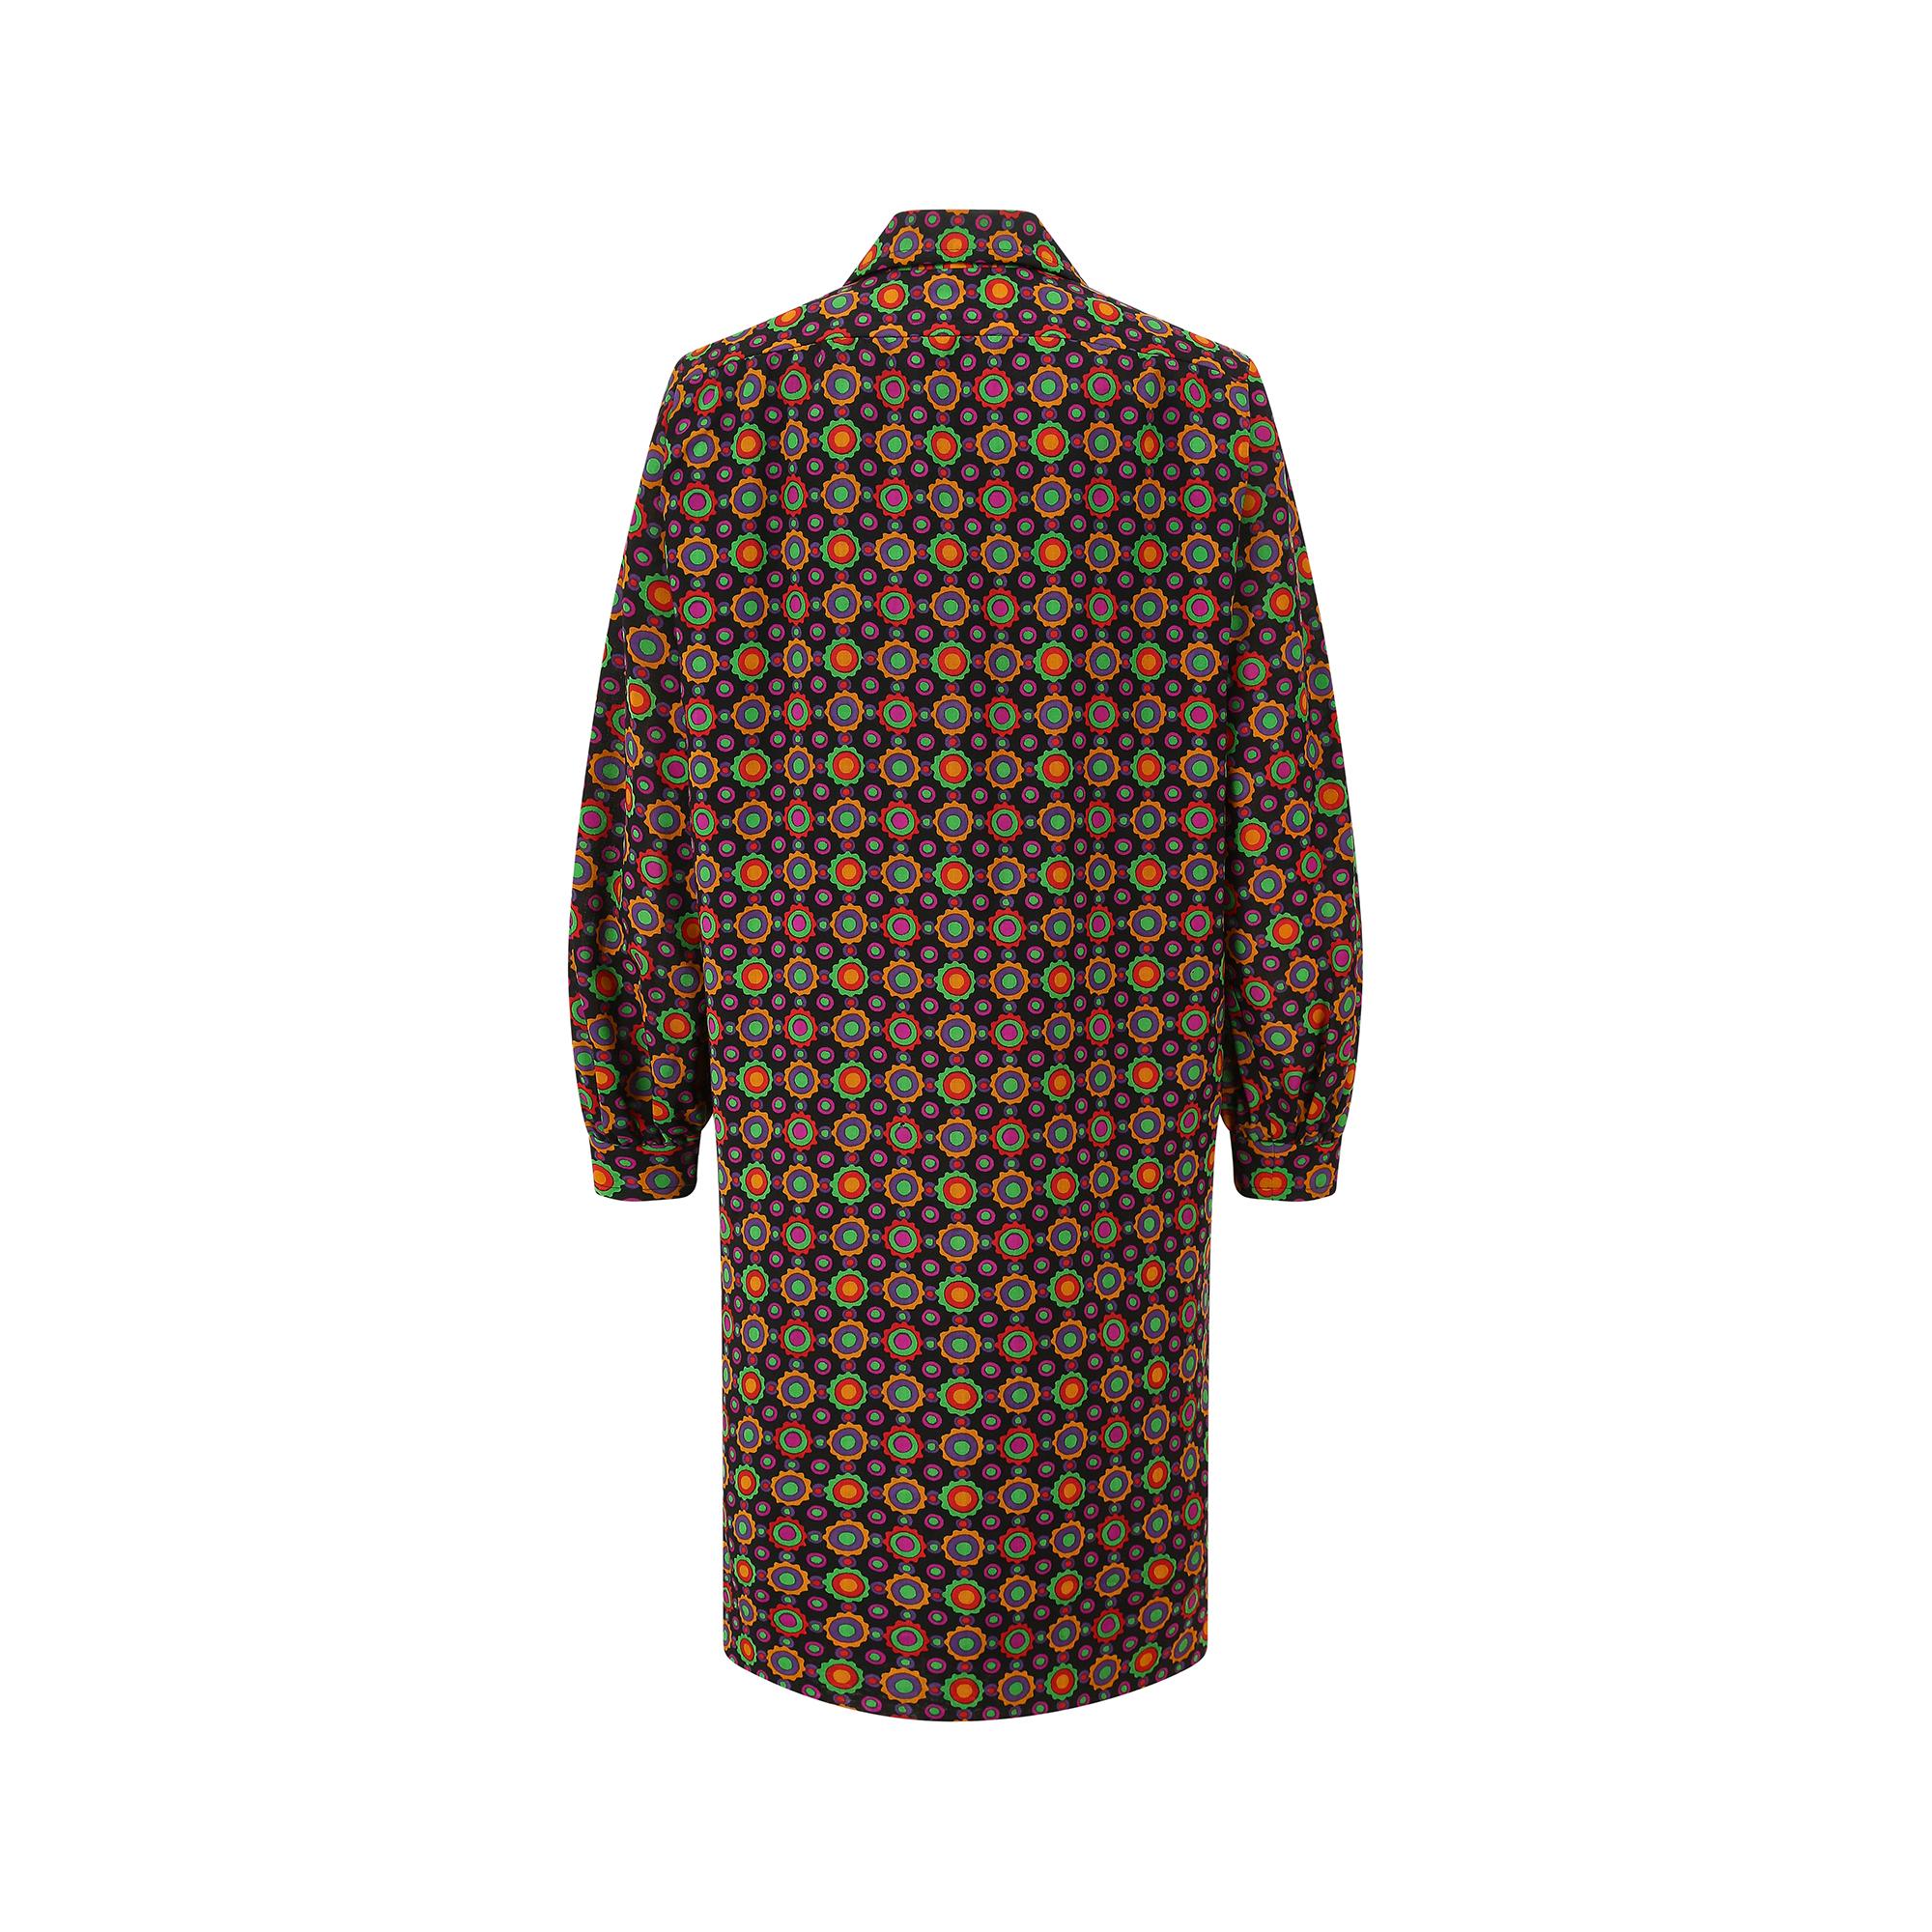 1990 Yves Saint Laurent Colourful Abstract Print Shirtwaister Dress In Excellent Condition For Sale In London, GB